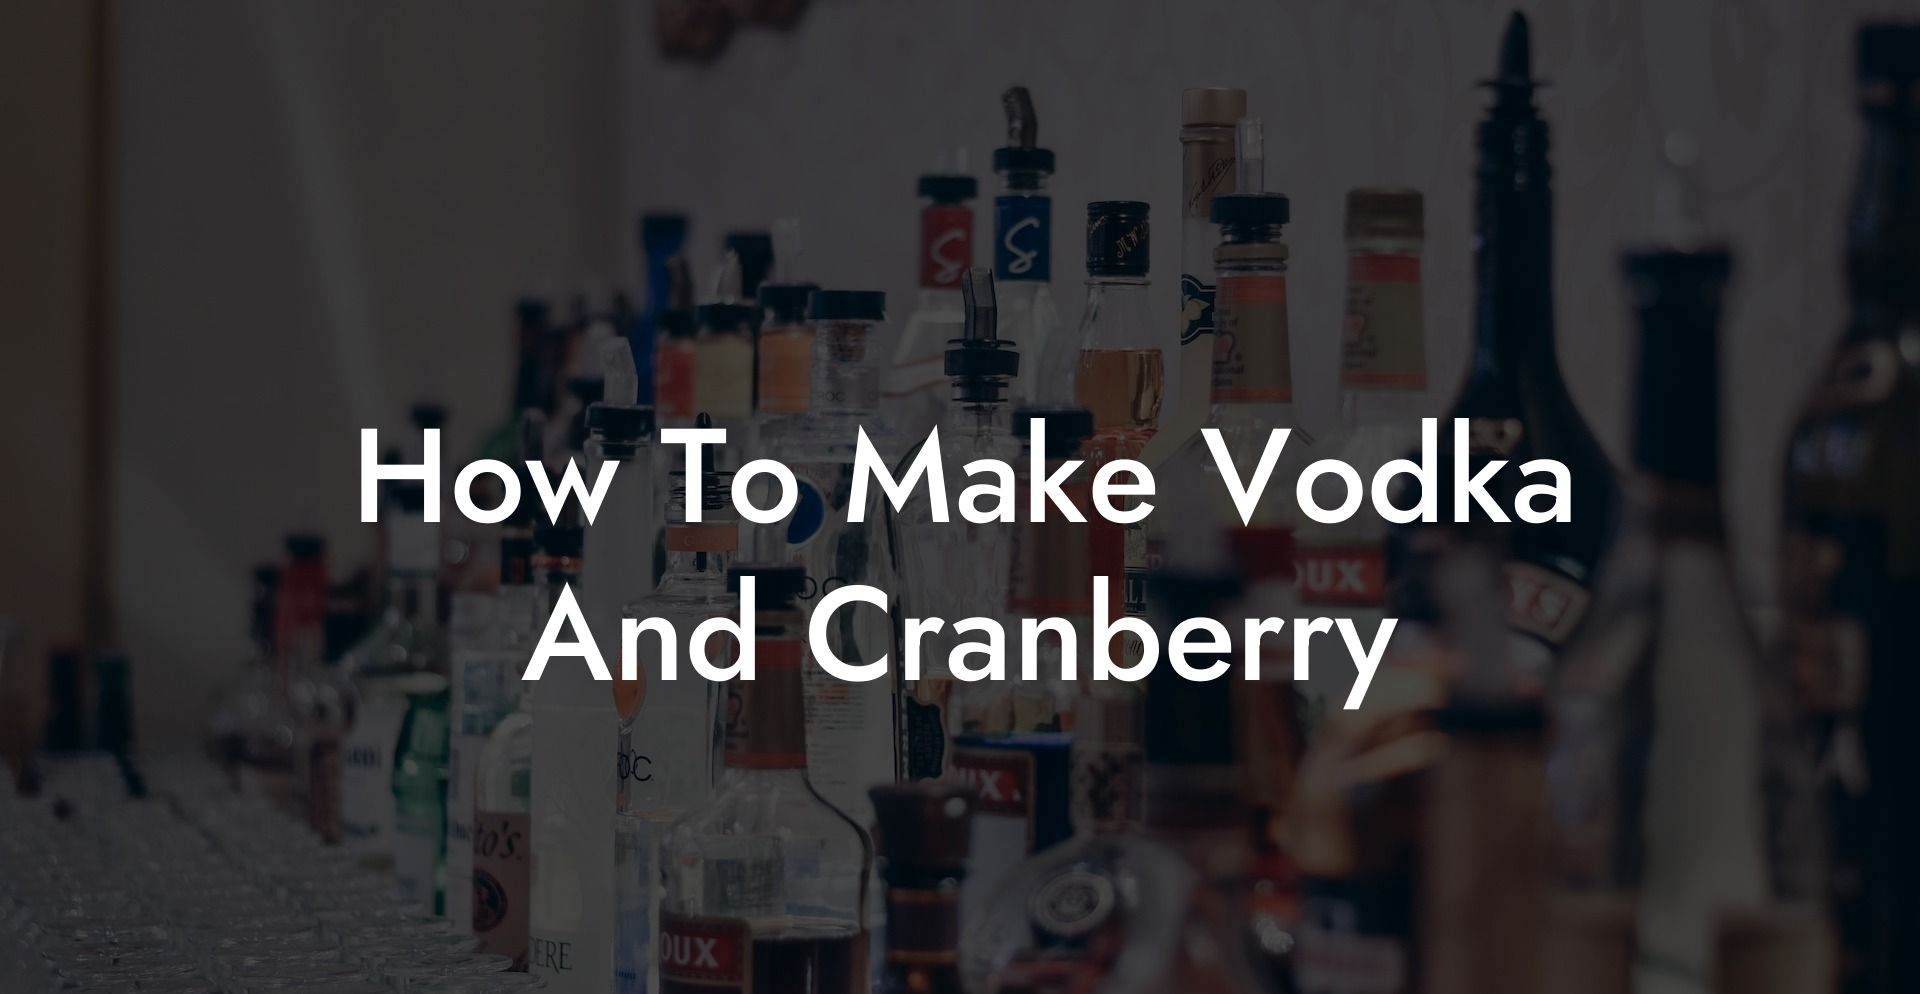 How To Make Vodka And Cranberry